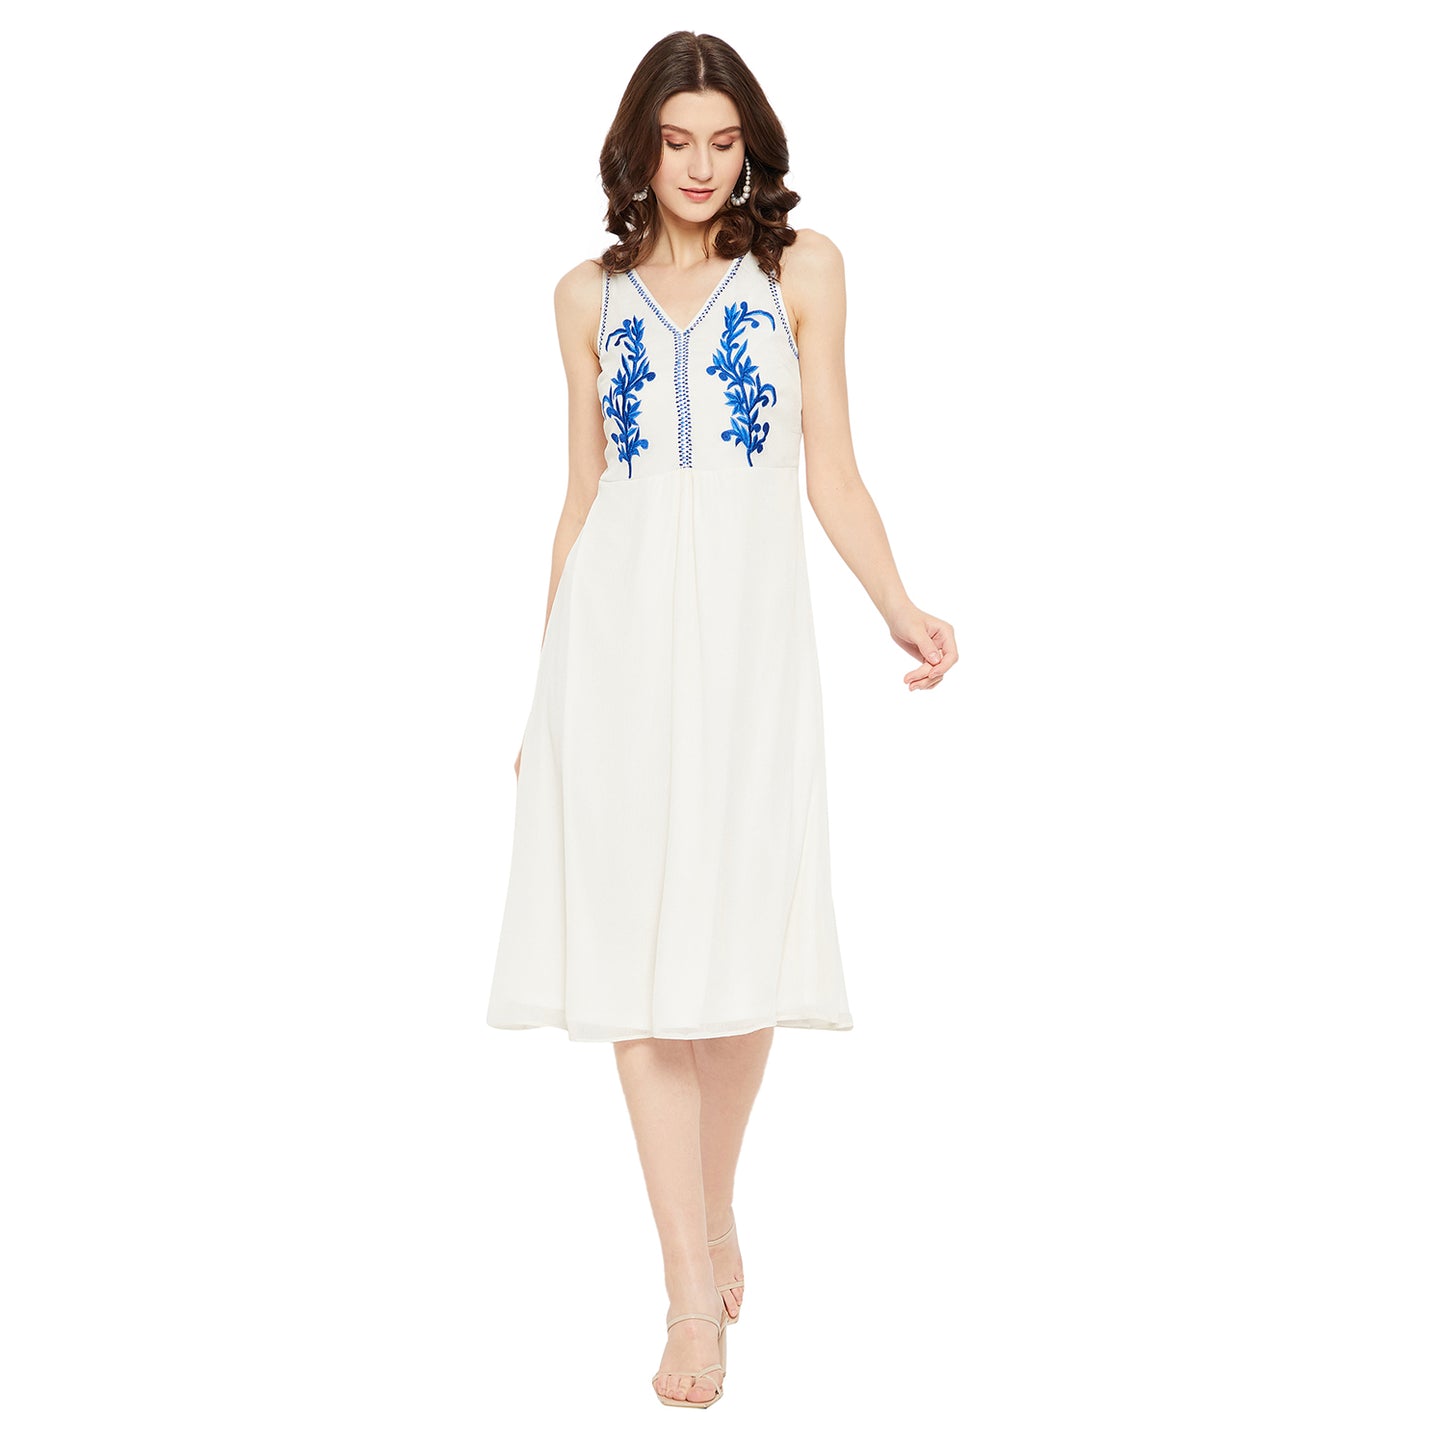 LY2 Elegant cream dress embroidered with thread